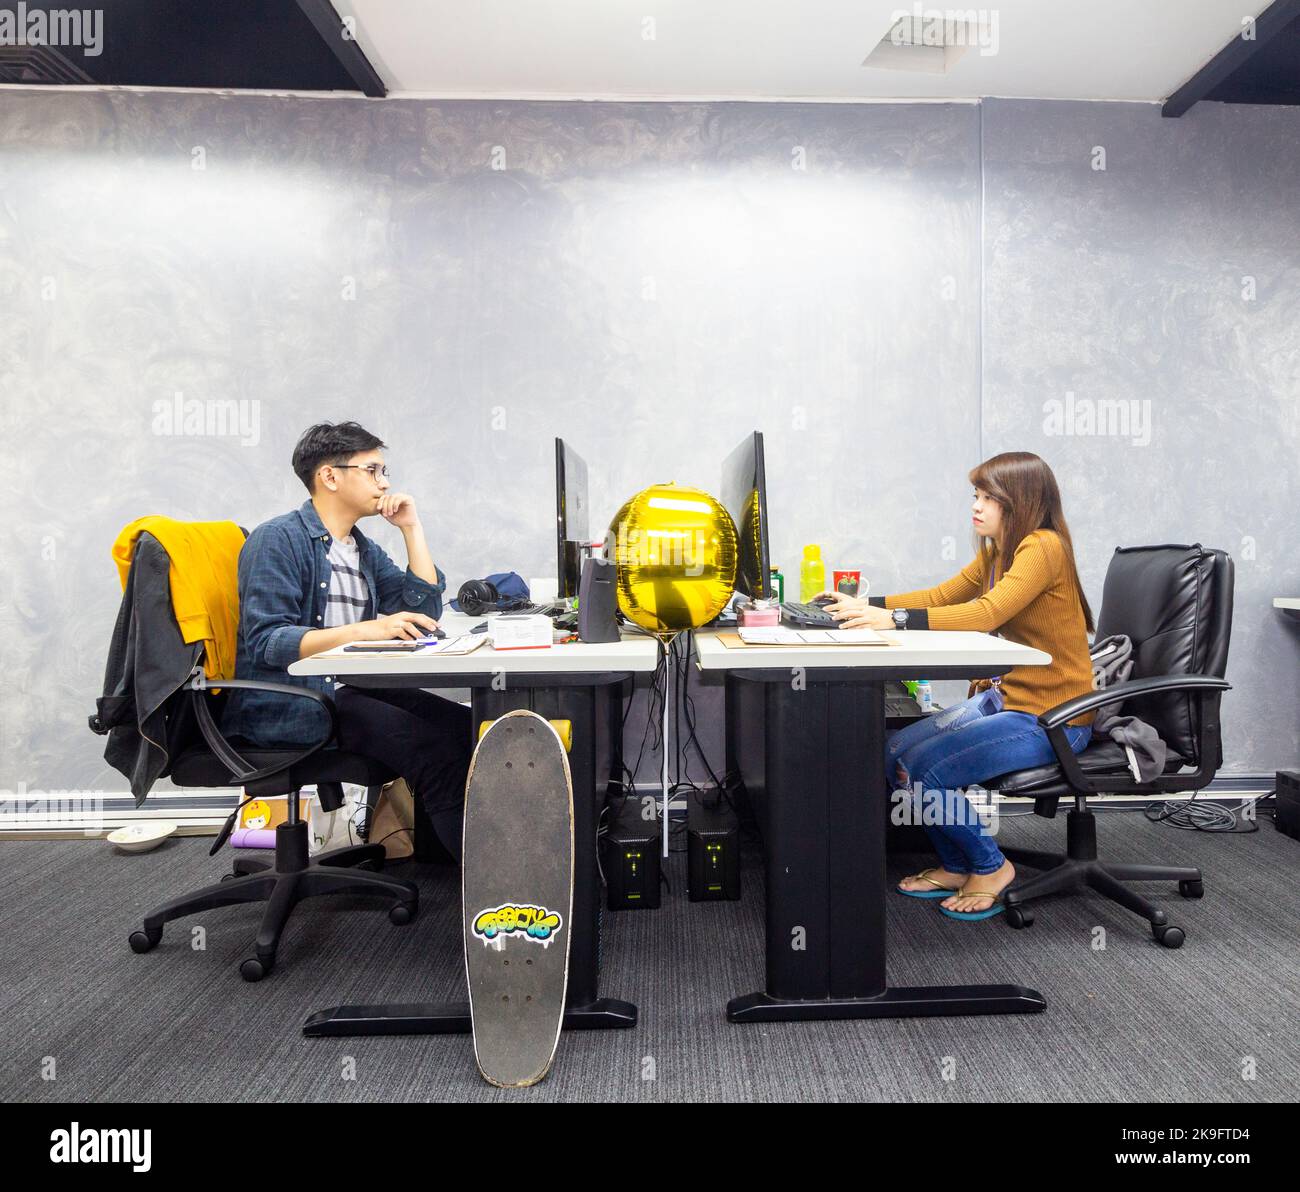 Inside a design and architecture firm in Metro Manila, Philippines Stock Photo